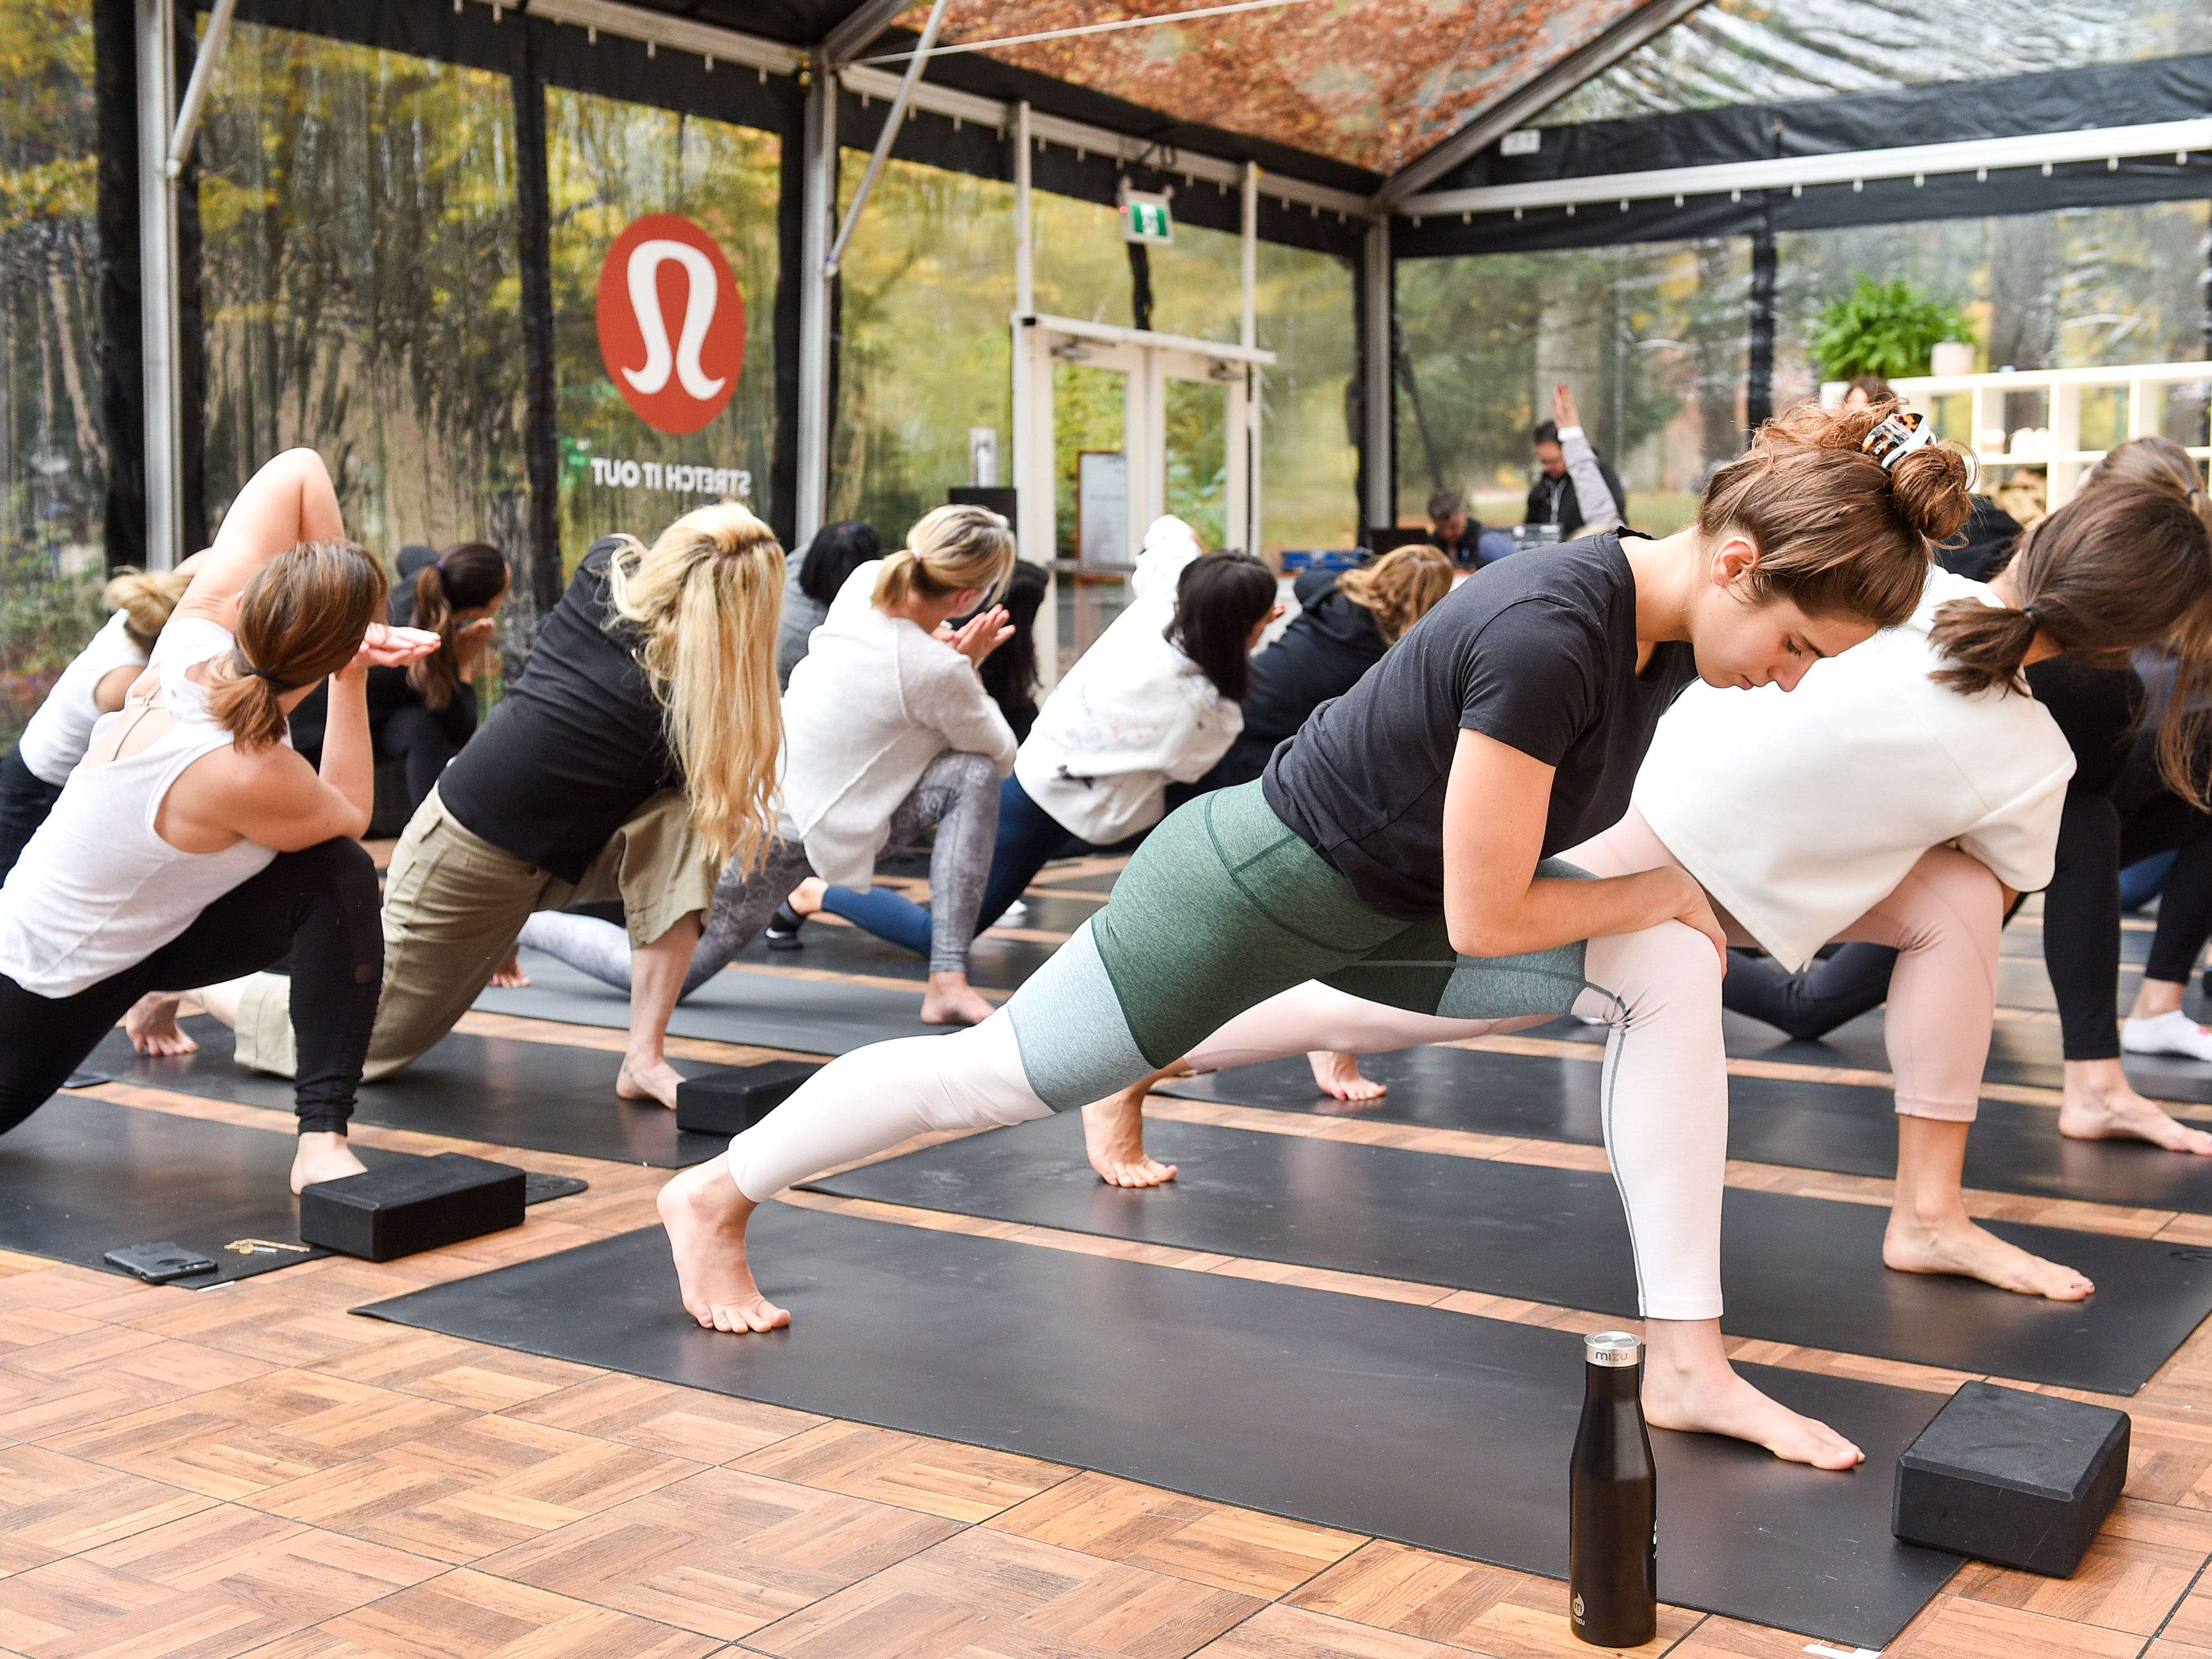 Lululemon makes a rare move discounting its clothing as the pandemic